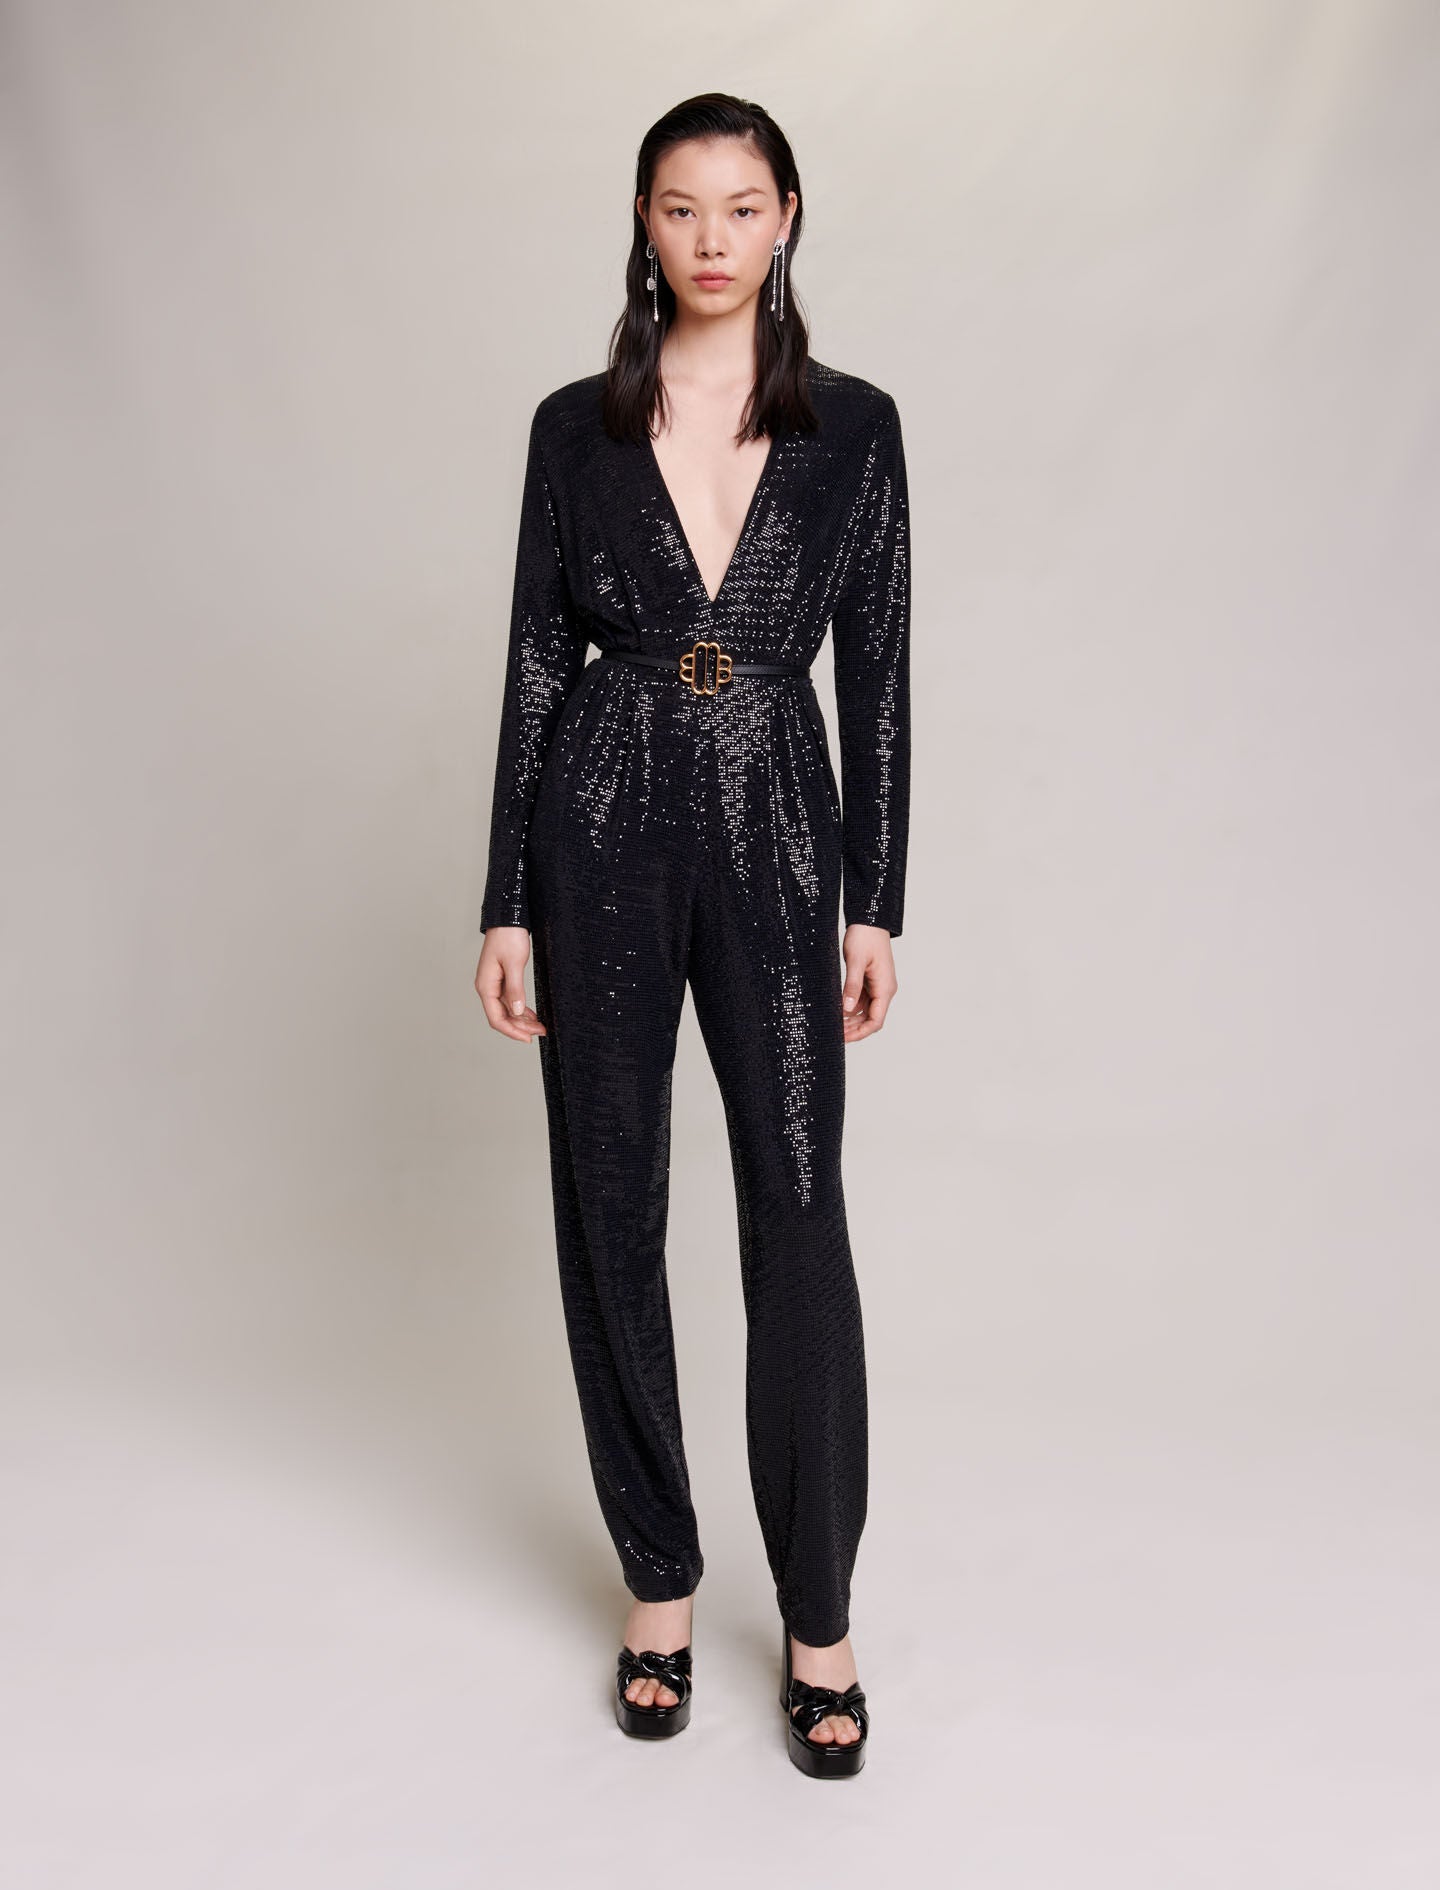 Black featured jumpsuit with sequins